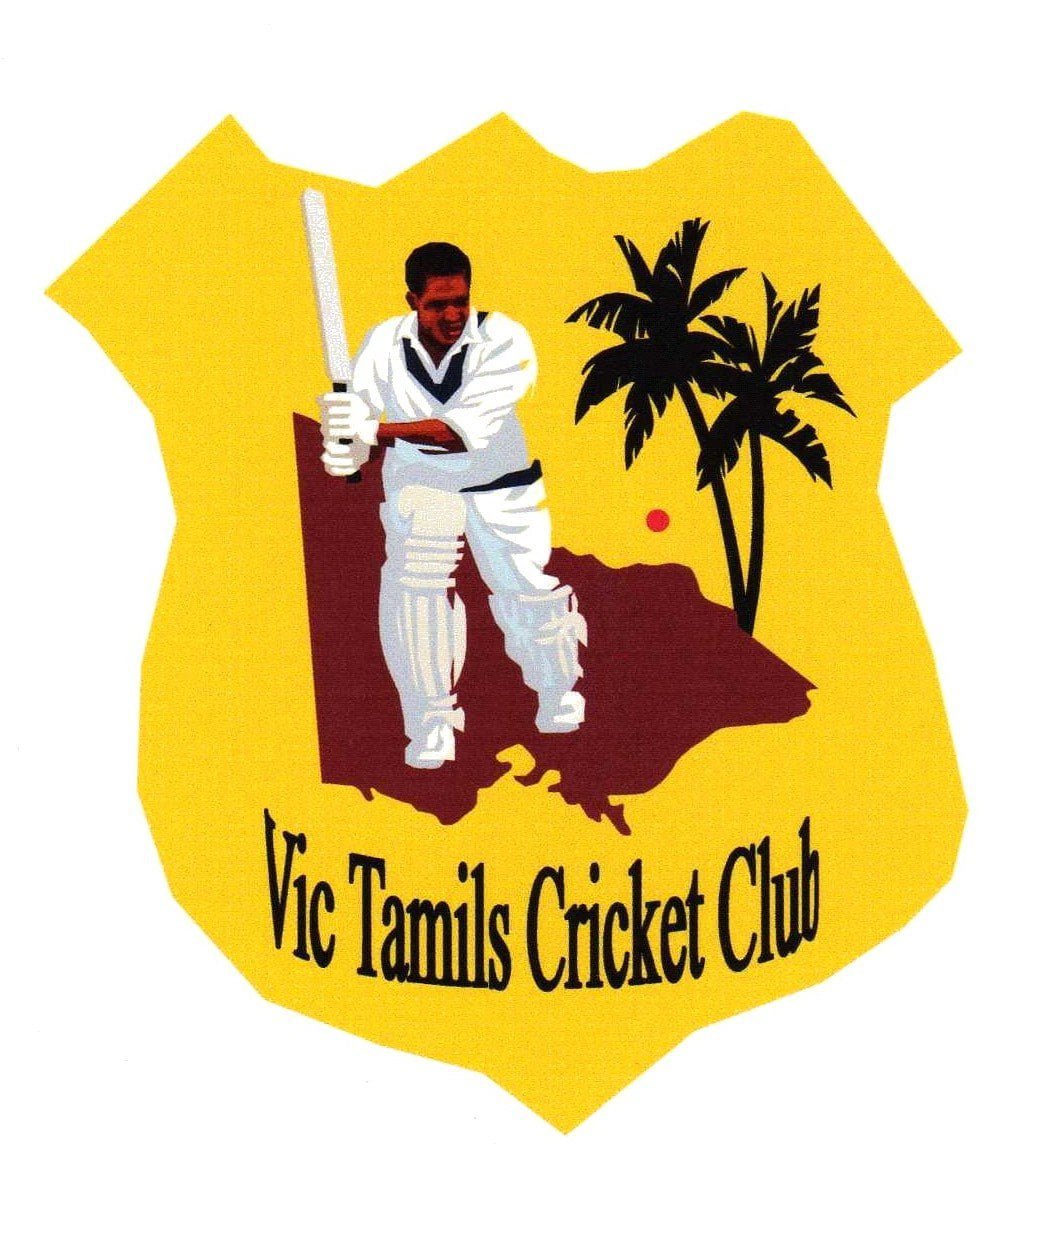 yellow shield shaped logo with the text Vic Tamils Cricket Club and drawing of a person in cricket whites, holding a bat standing on a brown shape with two palm trees to their right